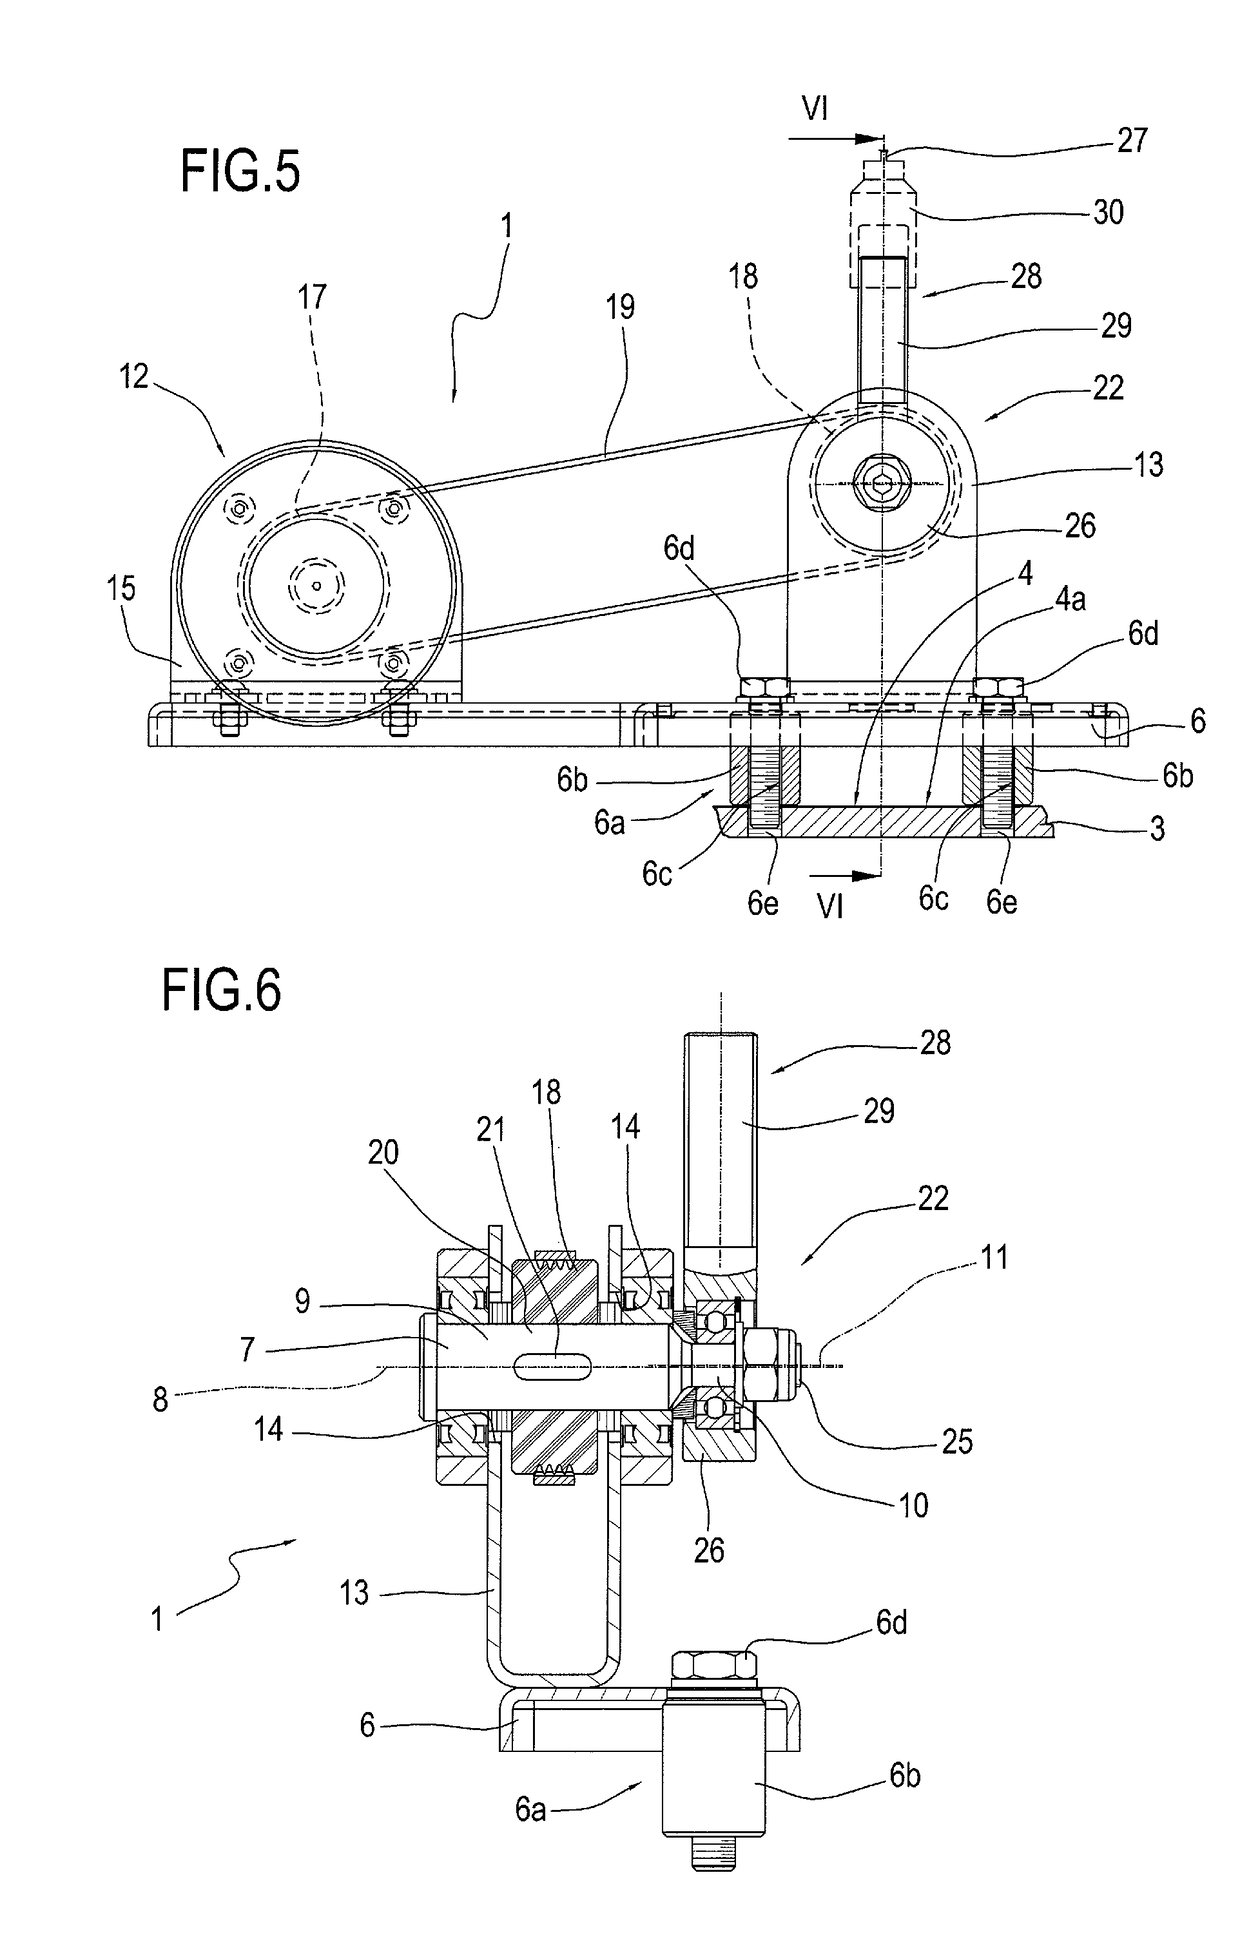 Force modulating device for a gym machine